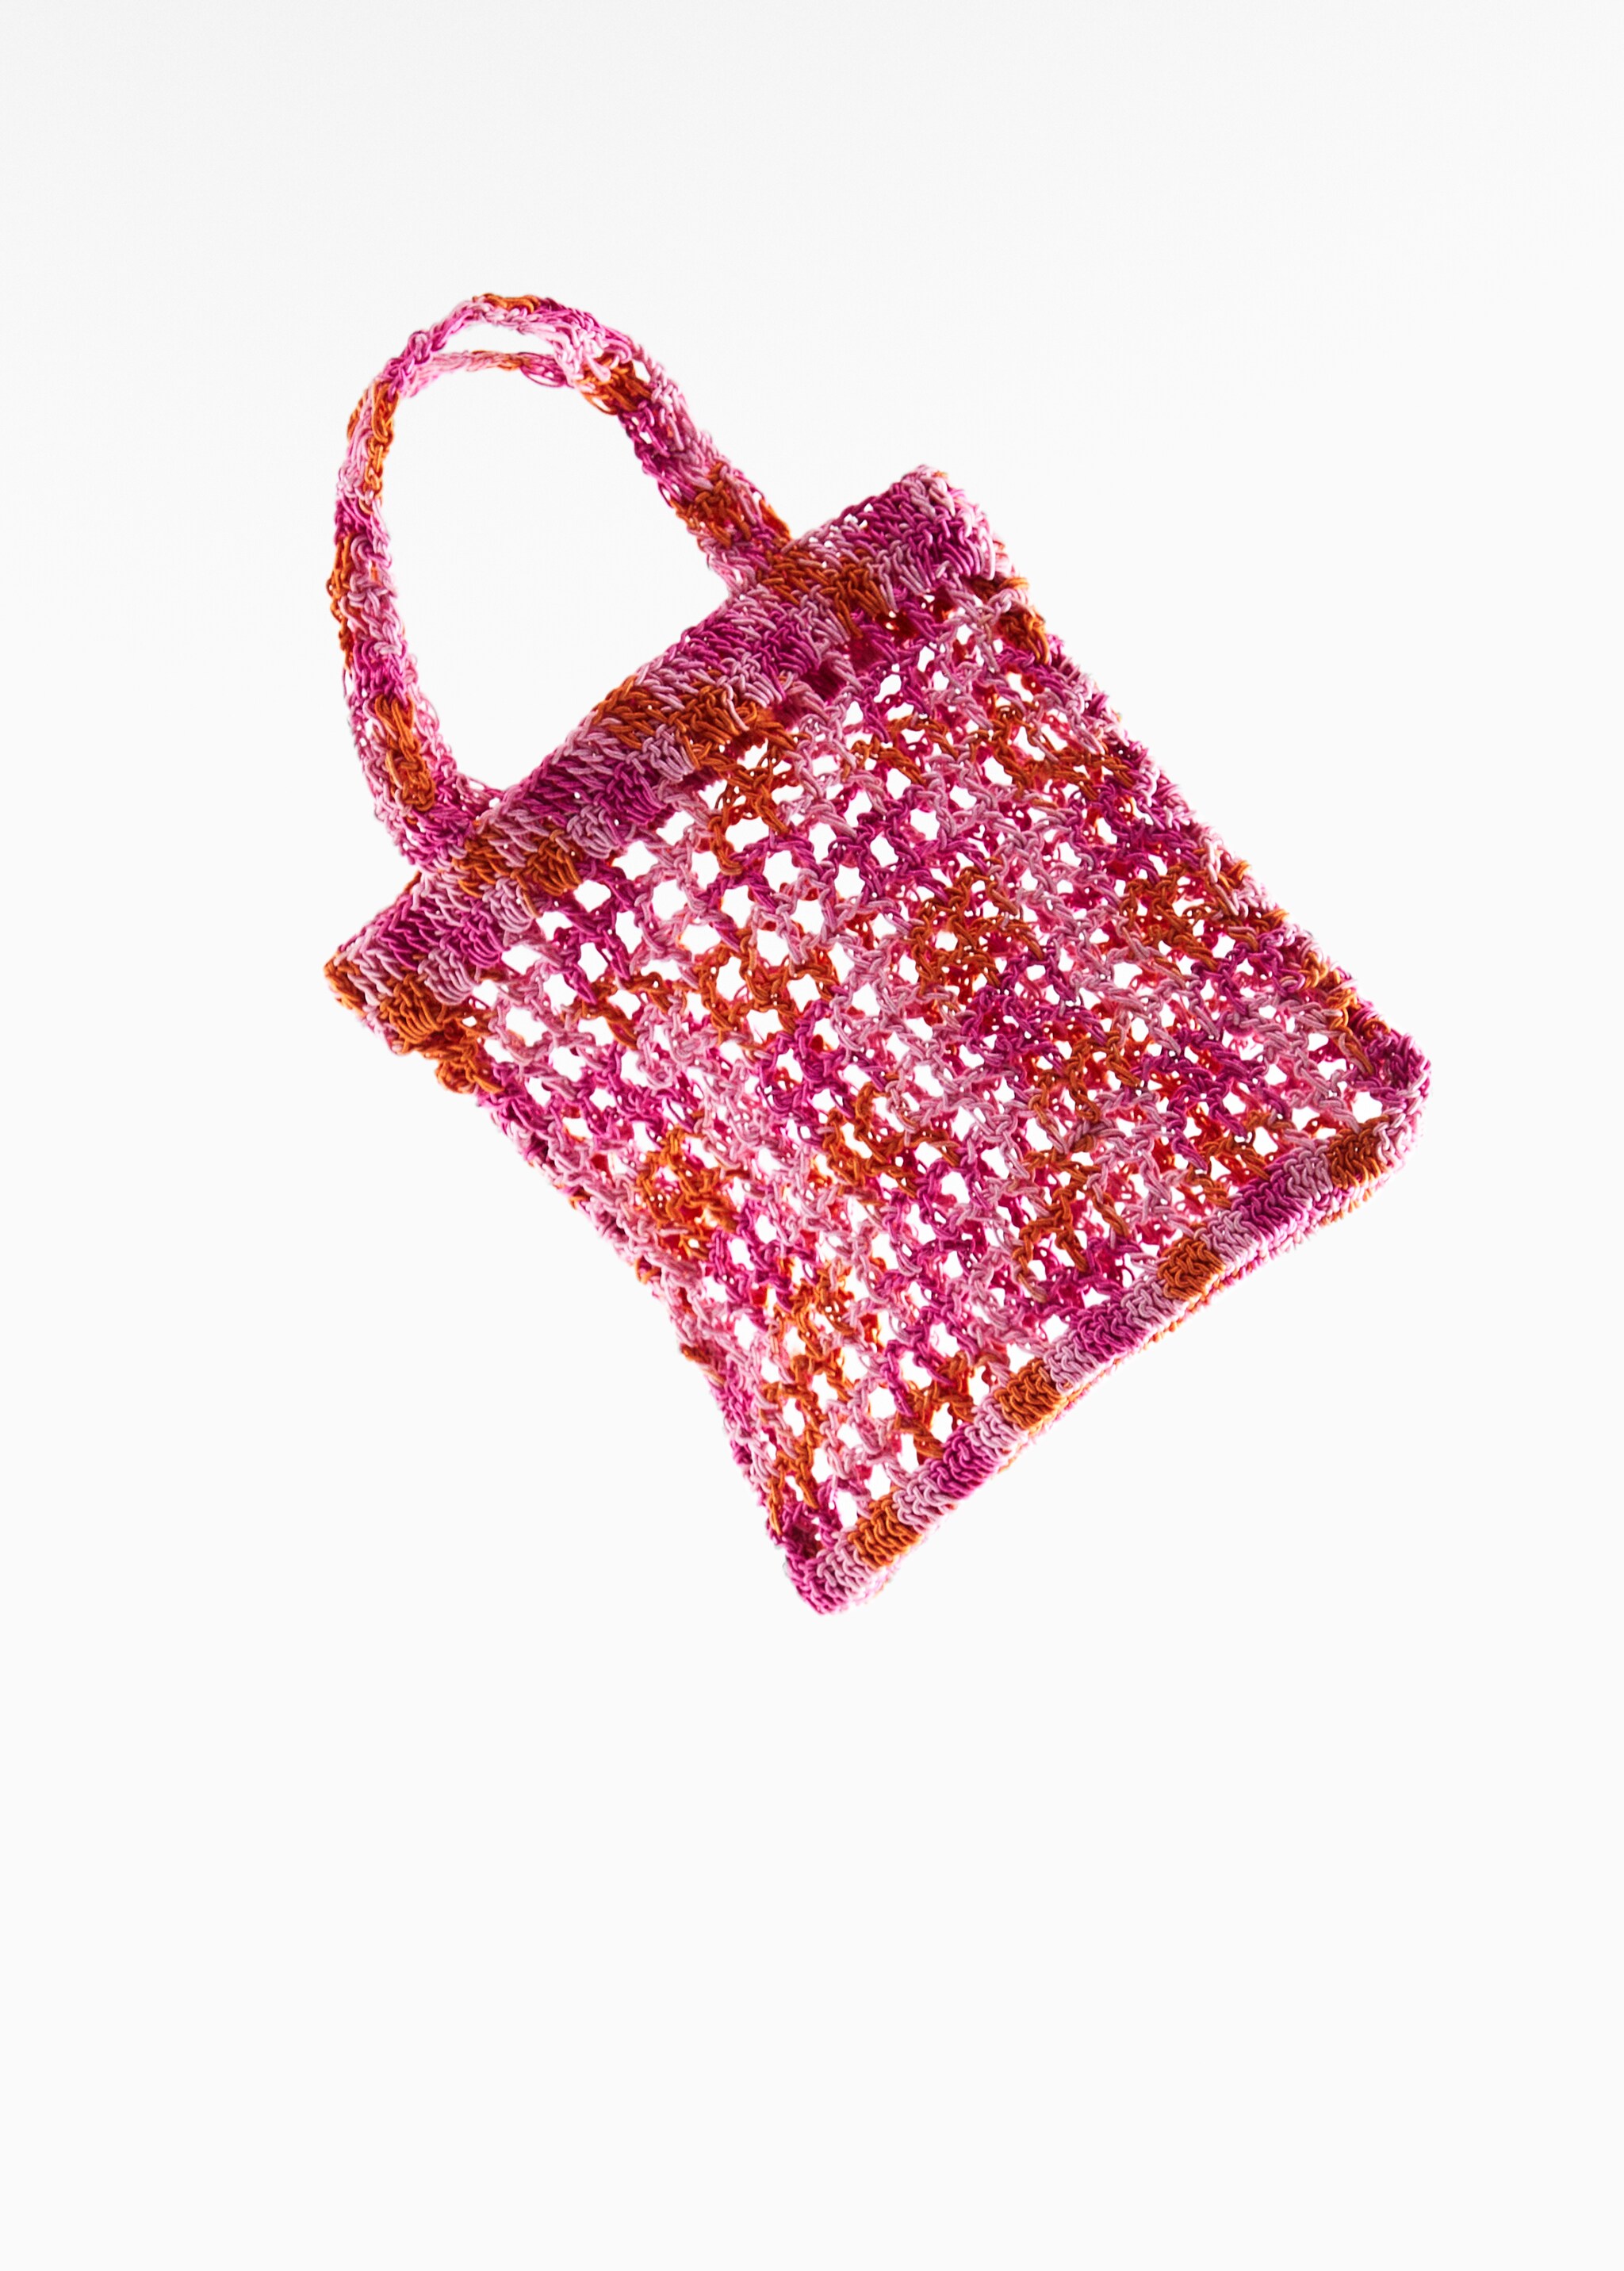 Braided net bag - Details of the article 2